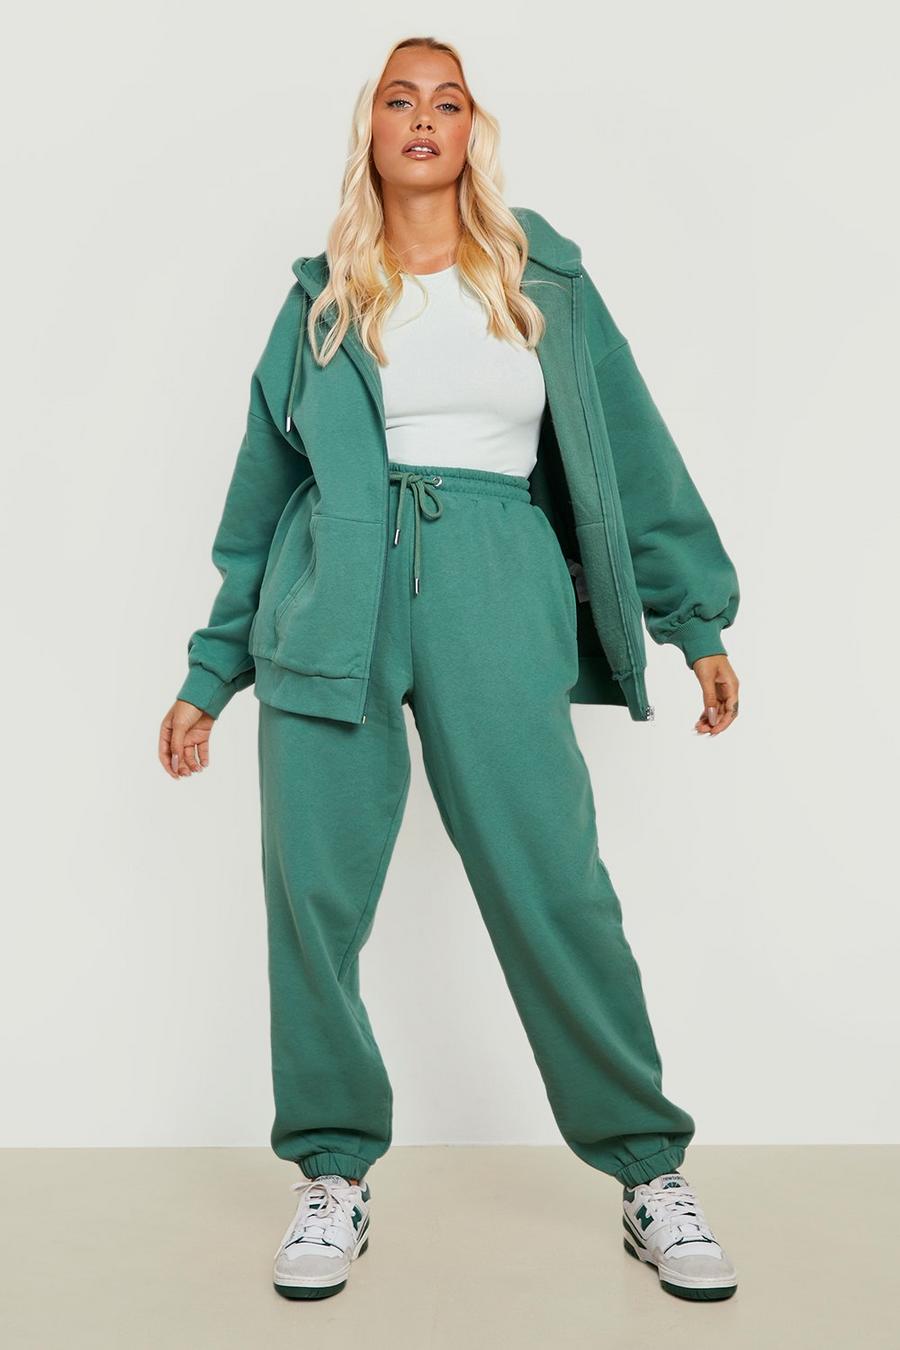 Necosthua Womens Two Piece Outfit Short Sleeve Pullover With Drawstring Long Pants Tracksuit Jogger Set with Pockets 